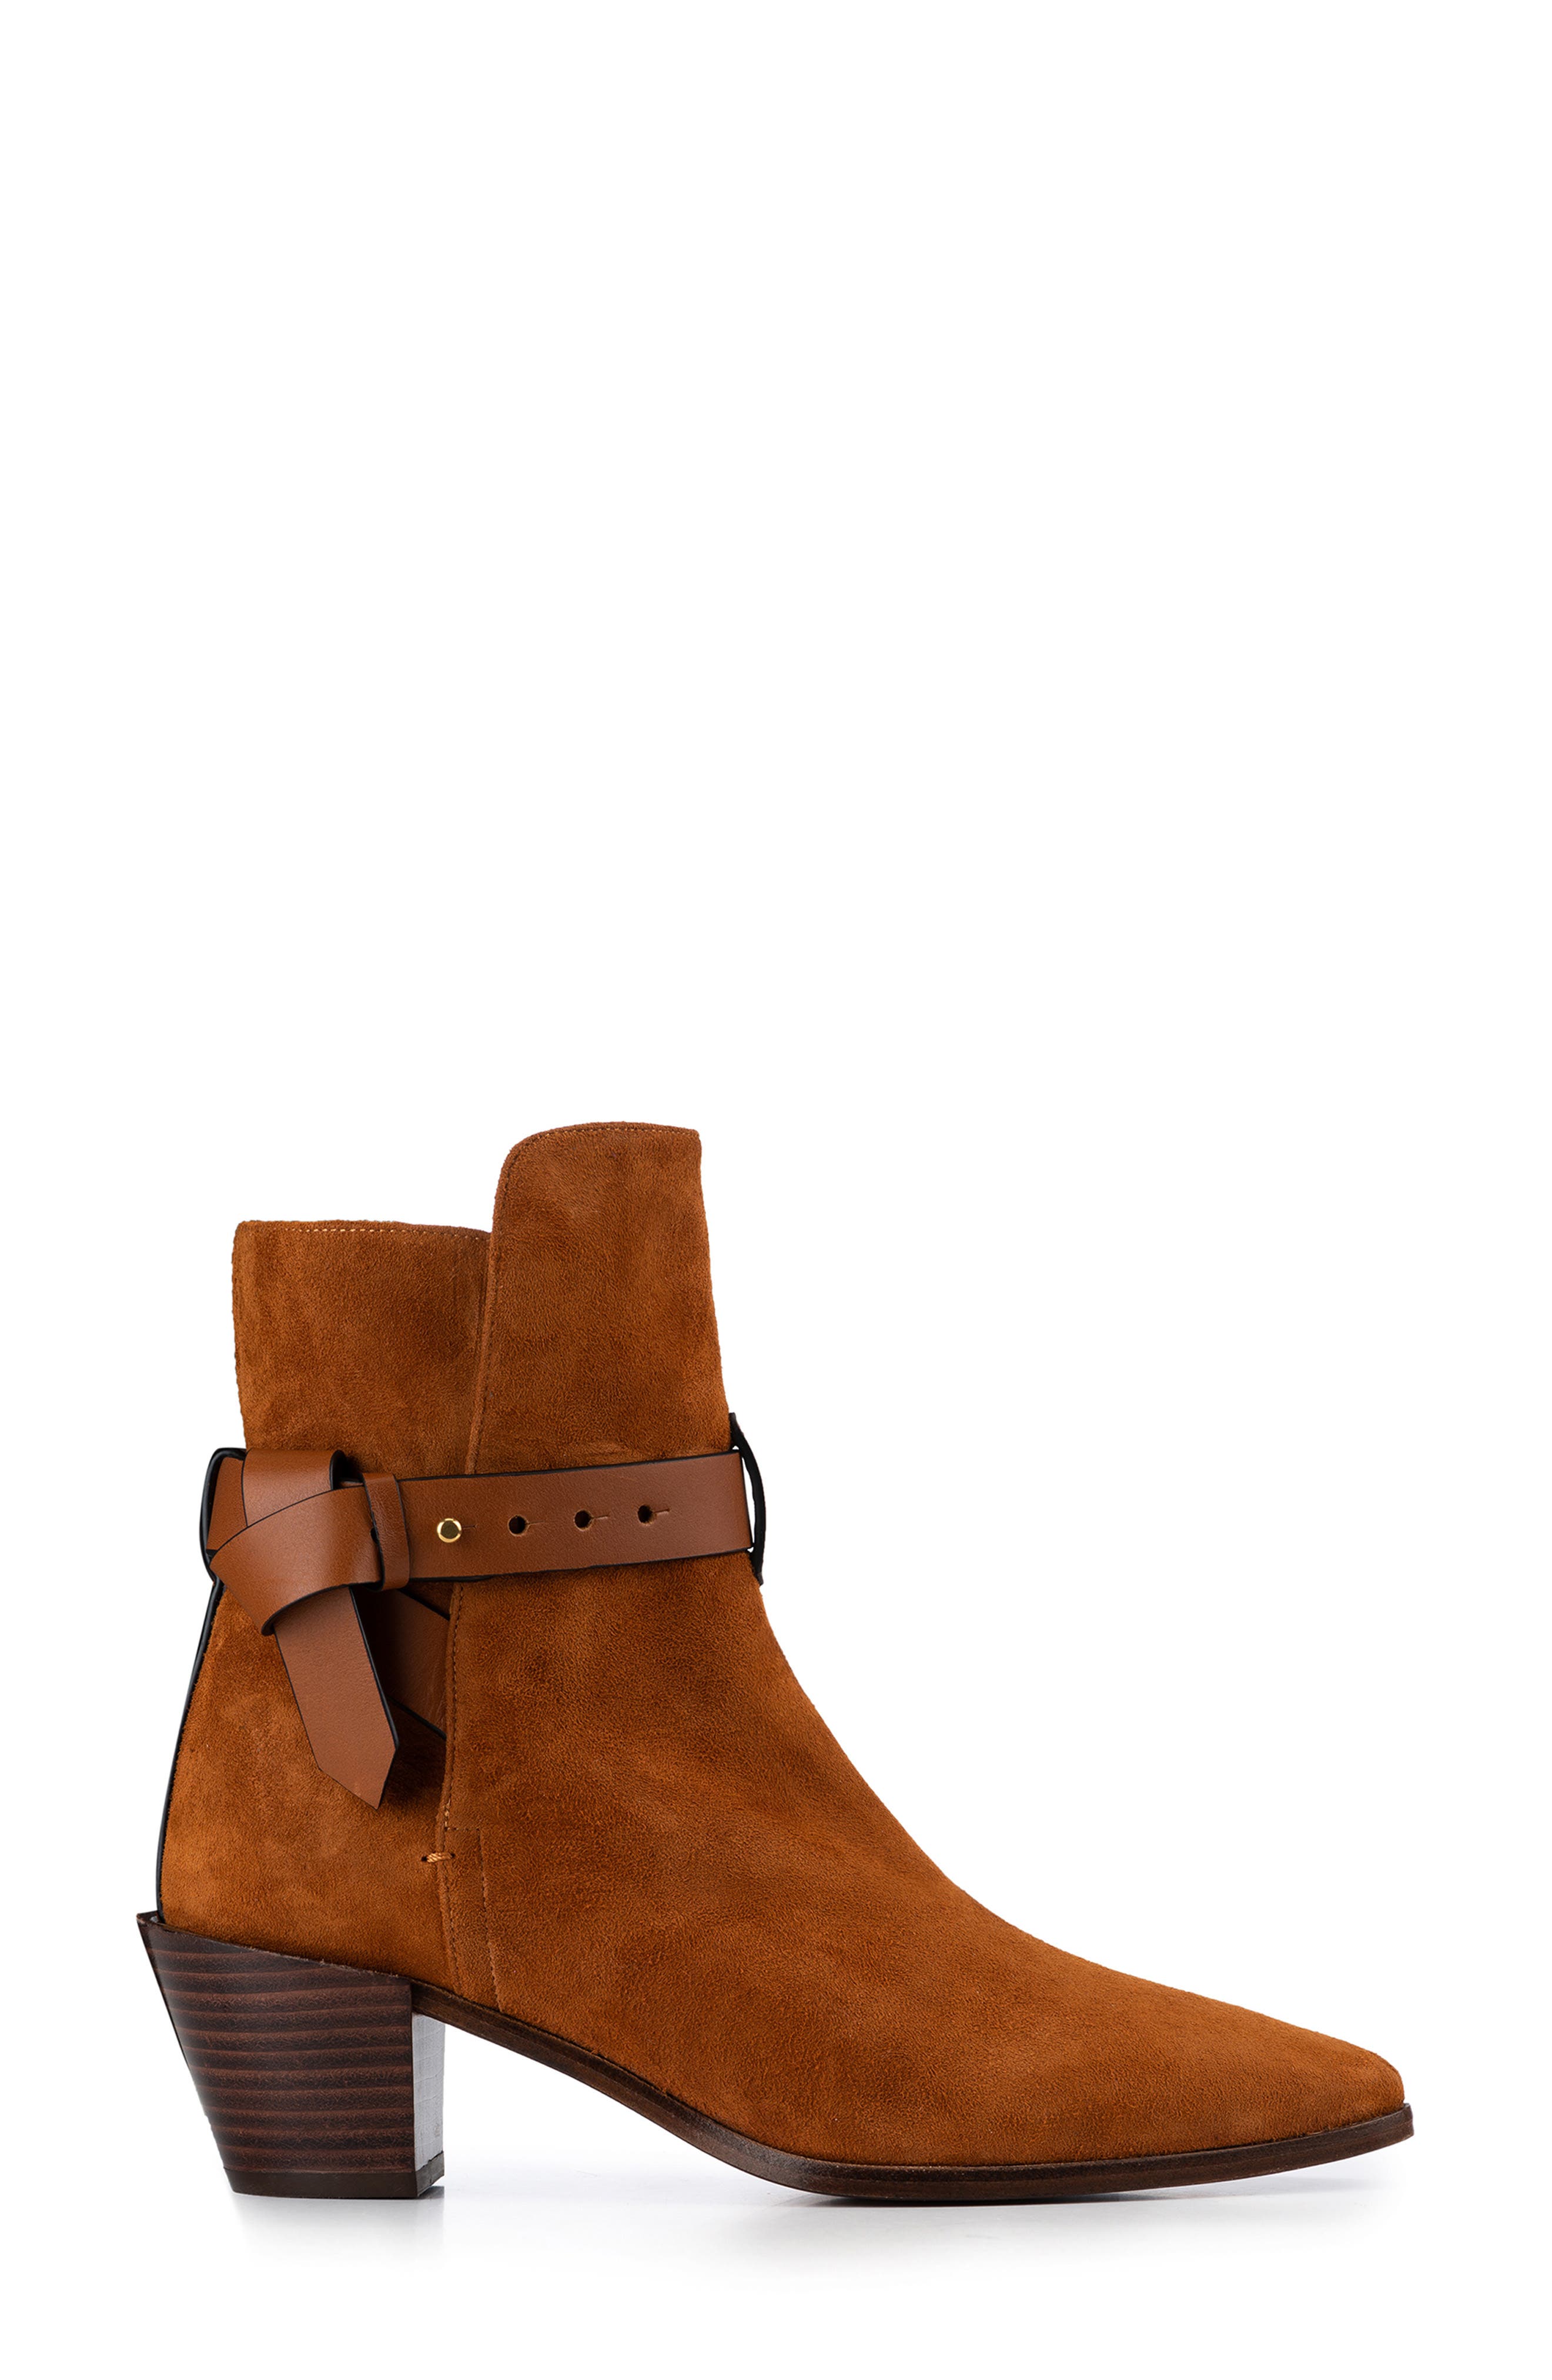 FRAME Le Beverly Bootie in Whiskey at Nordstrom, Size 5.5Us